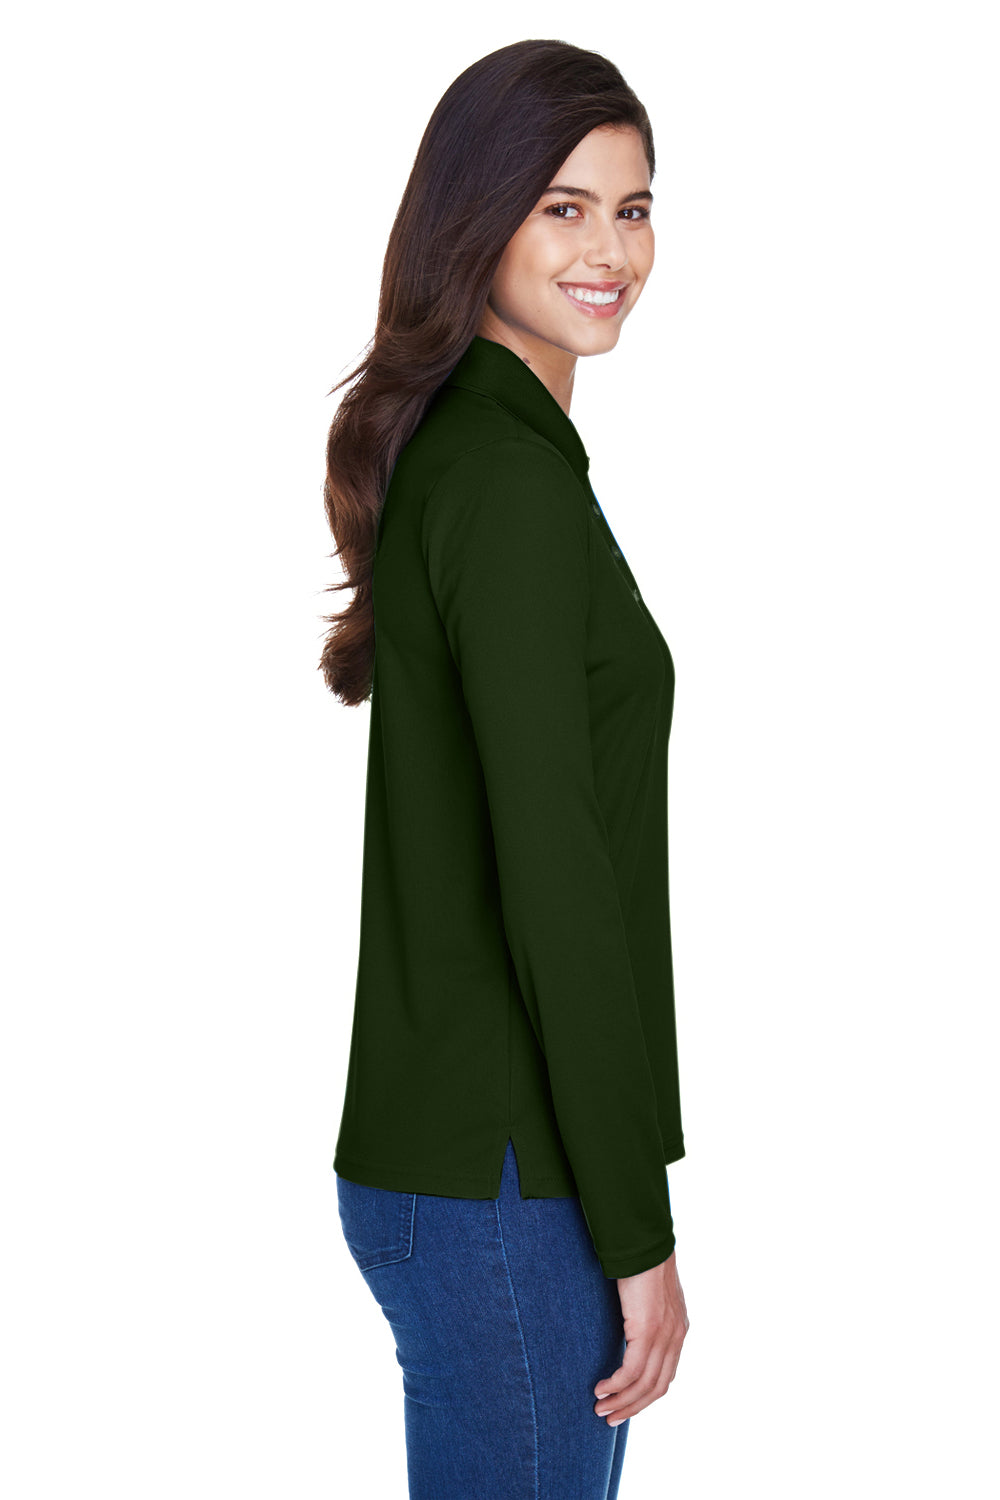 Core 365 78192 Womens Pinnacle Performance Moisture Wicking Long Sleeve Polo Shirt Forest Green Side